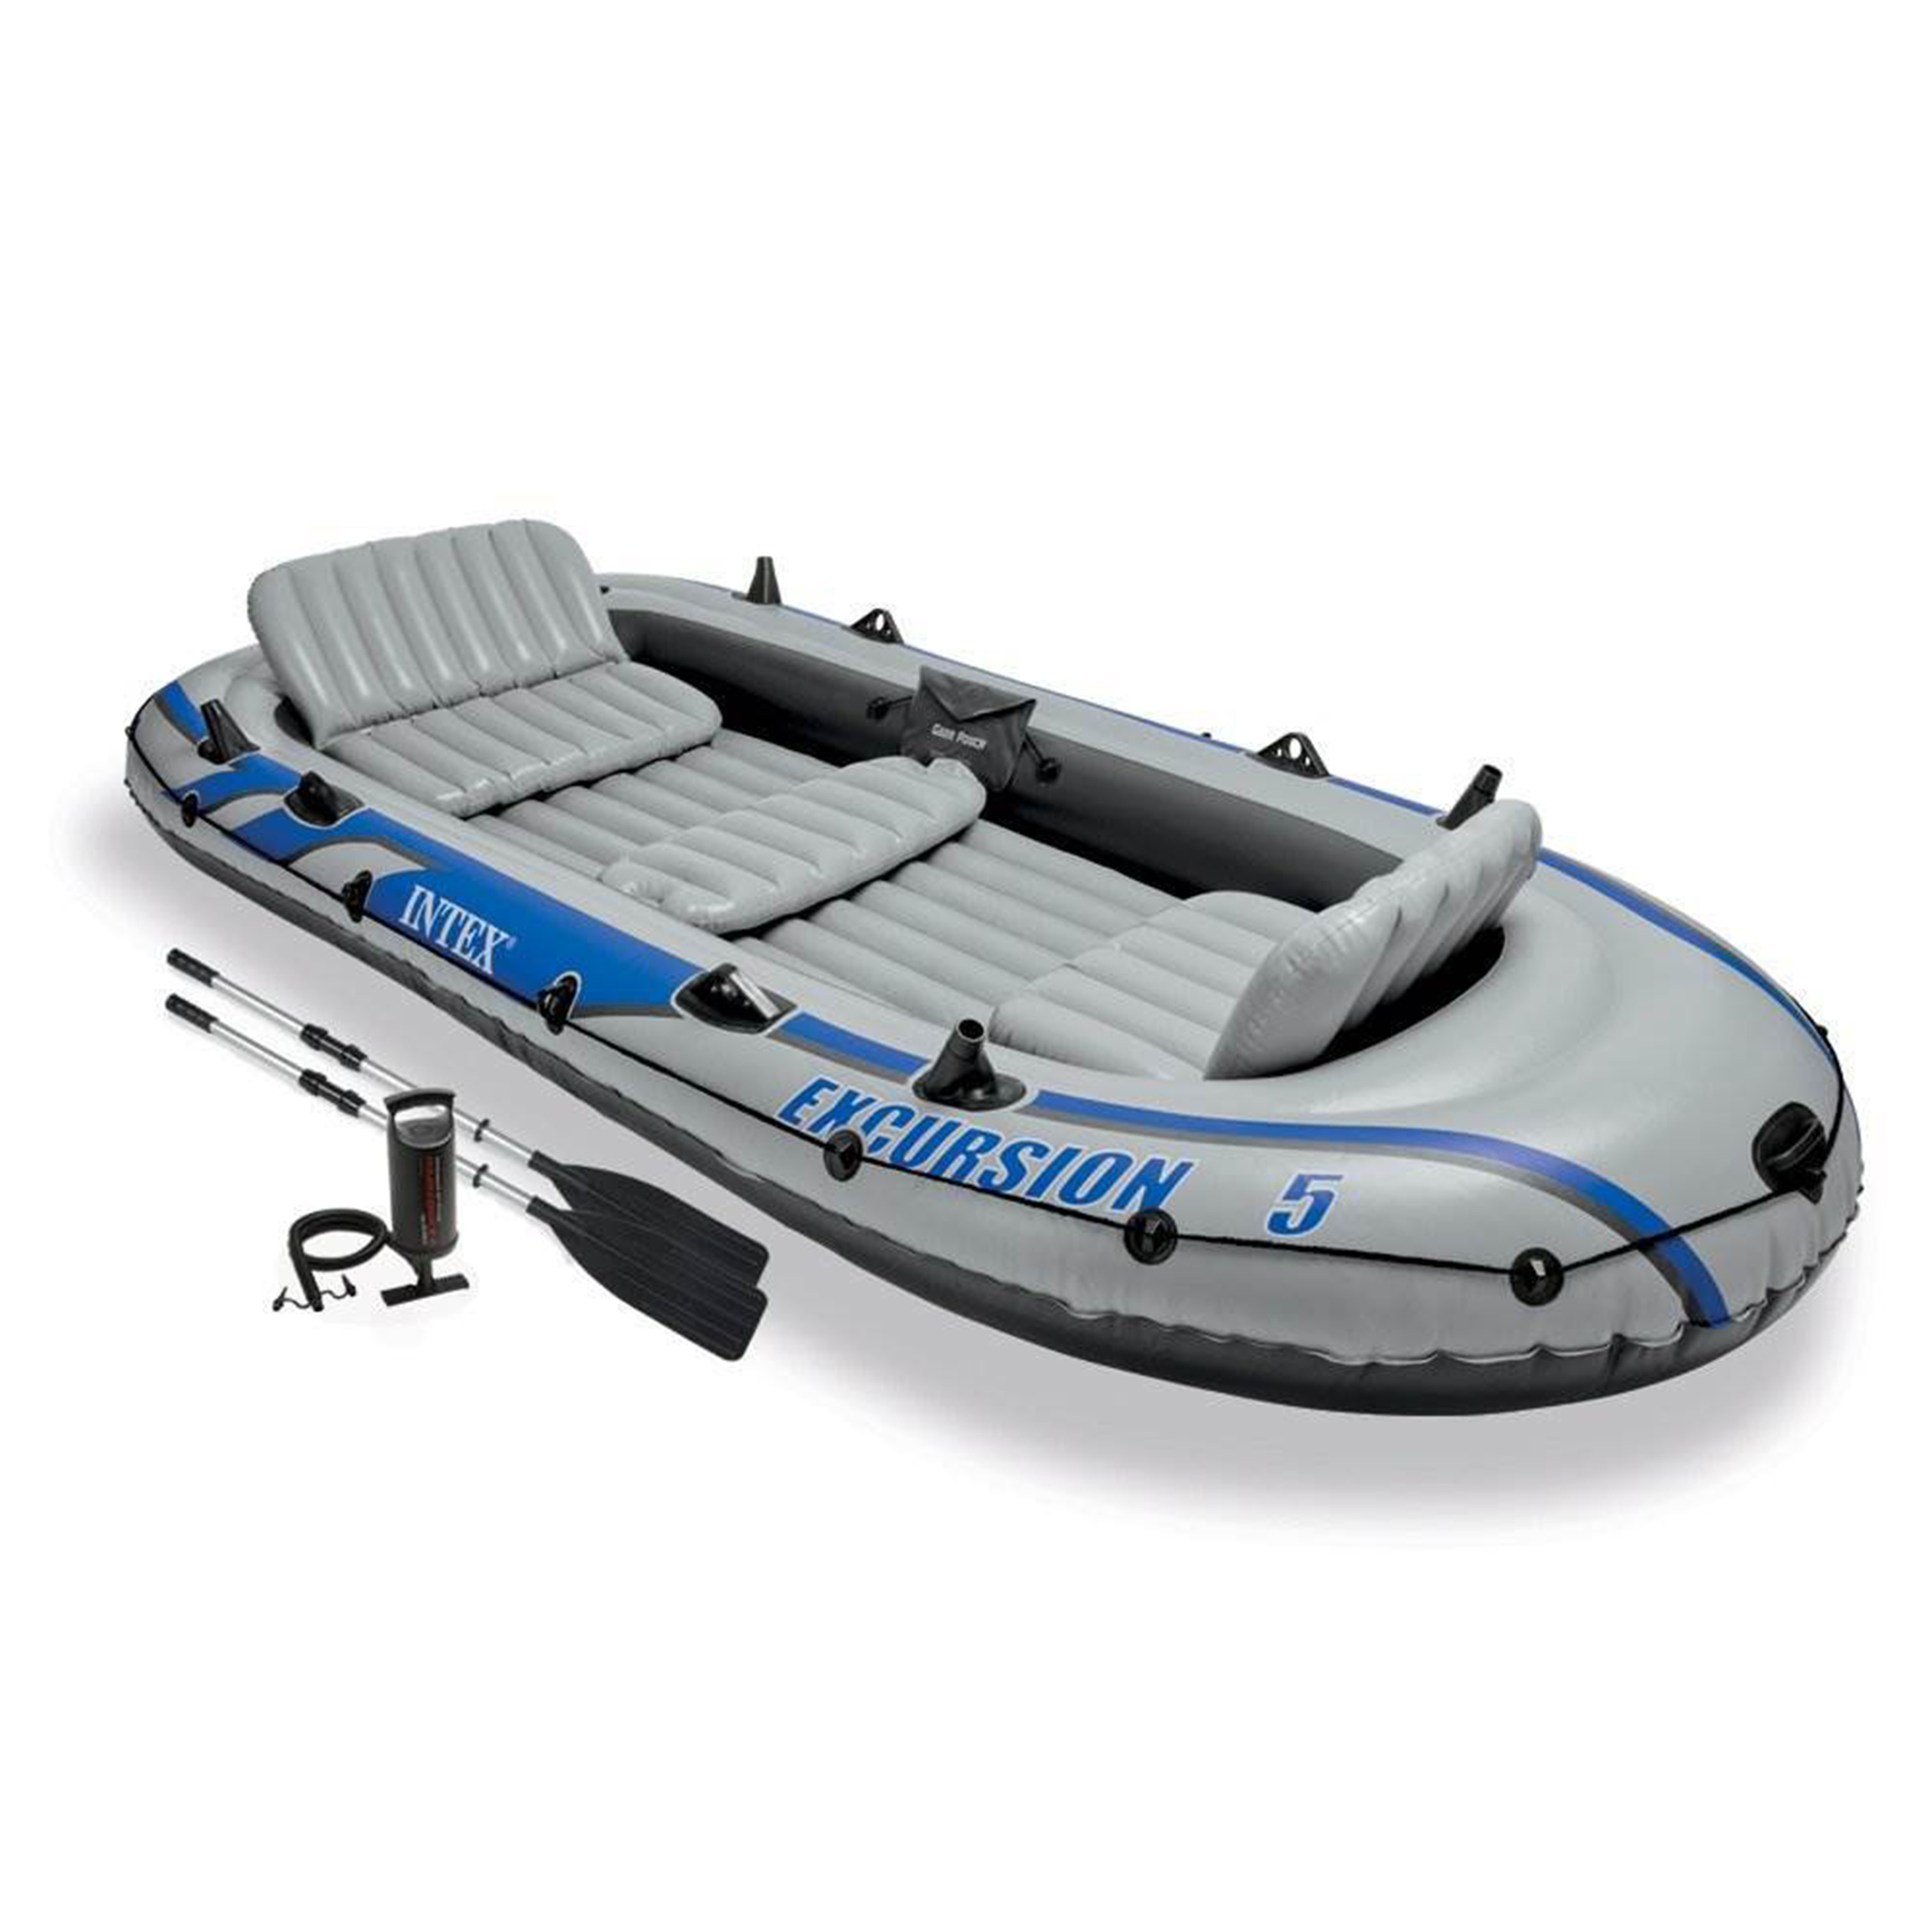 Intex Excursion 5 Person Inflatable Fishing Boat with Composite Motor Mount - image 3 of 13